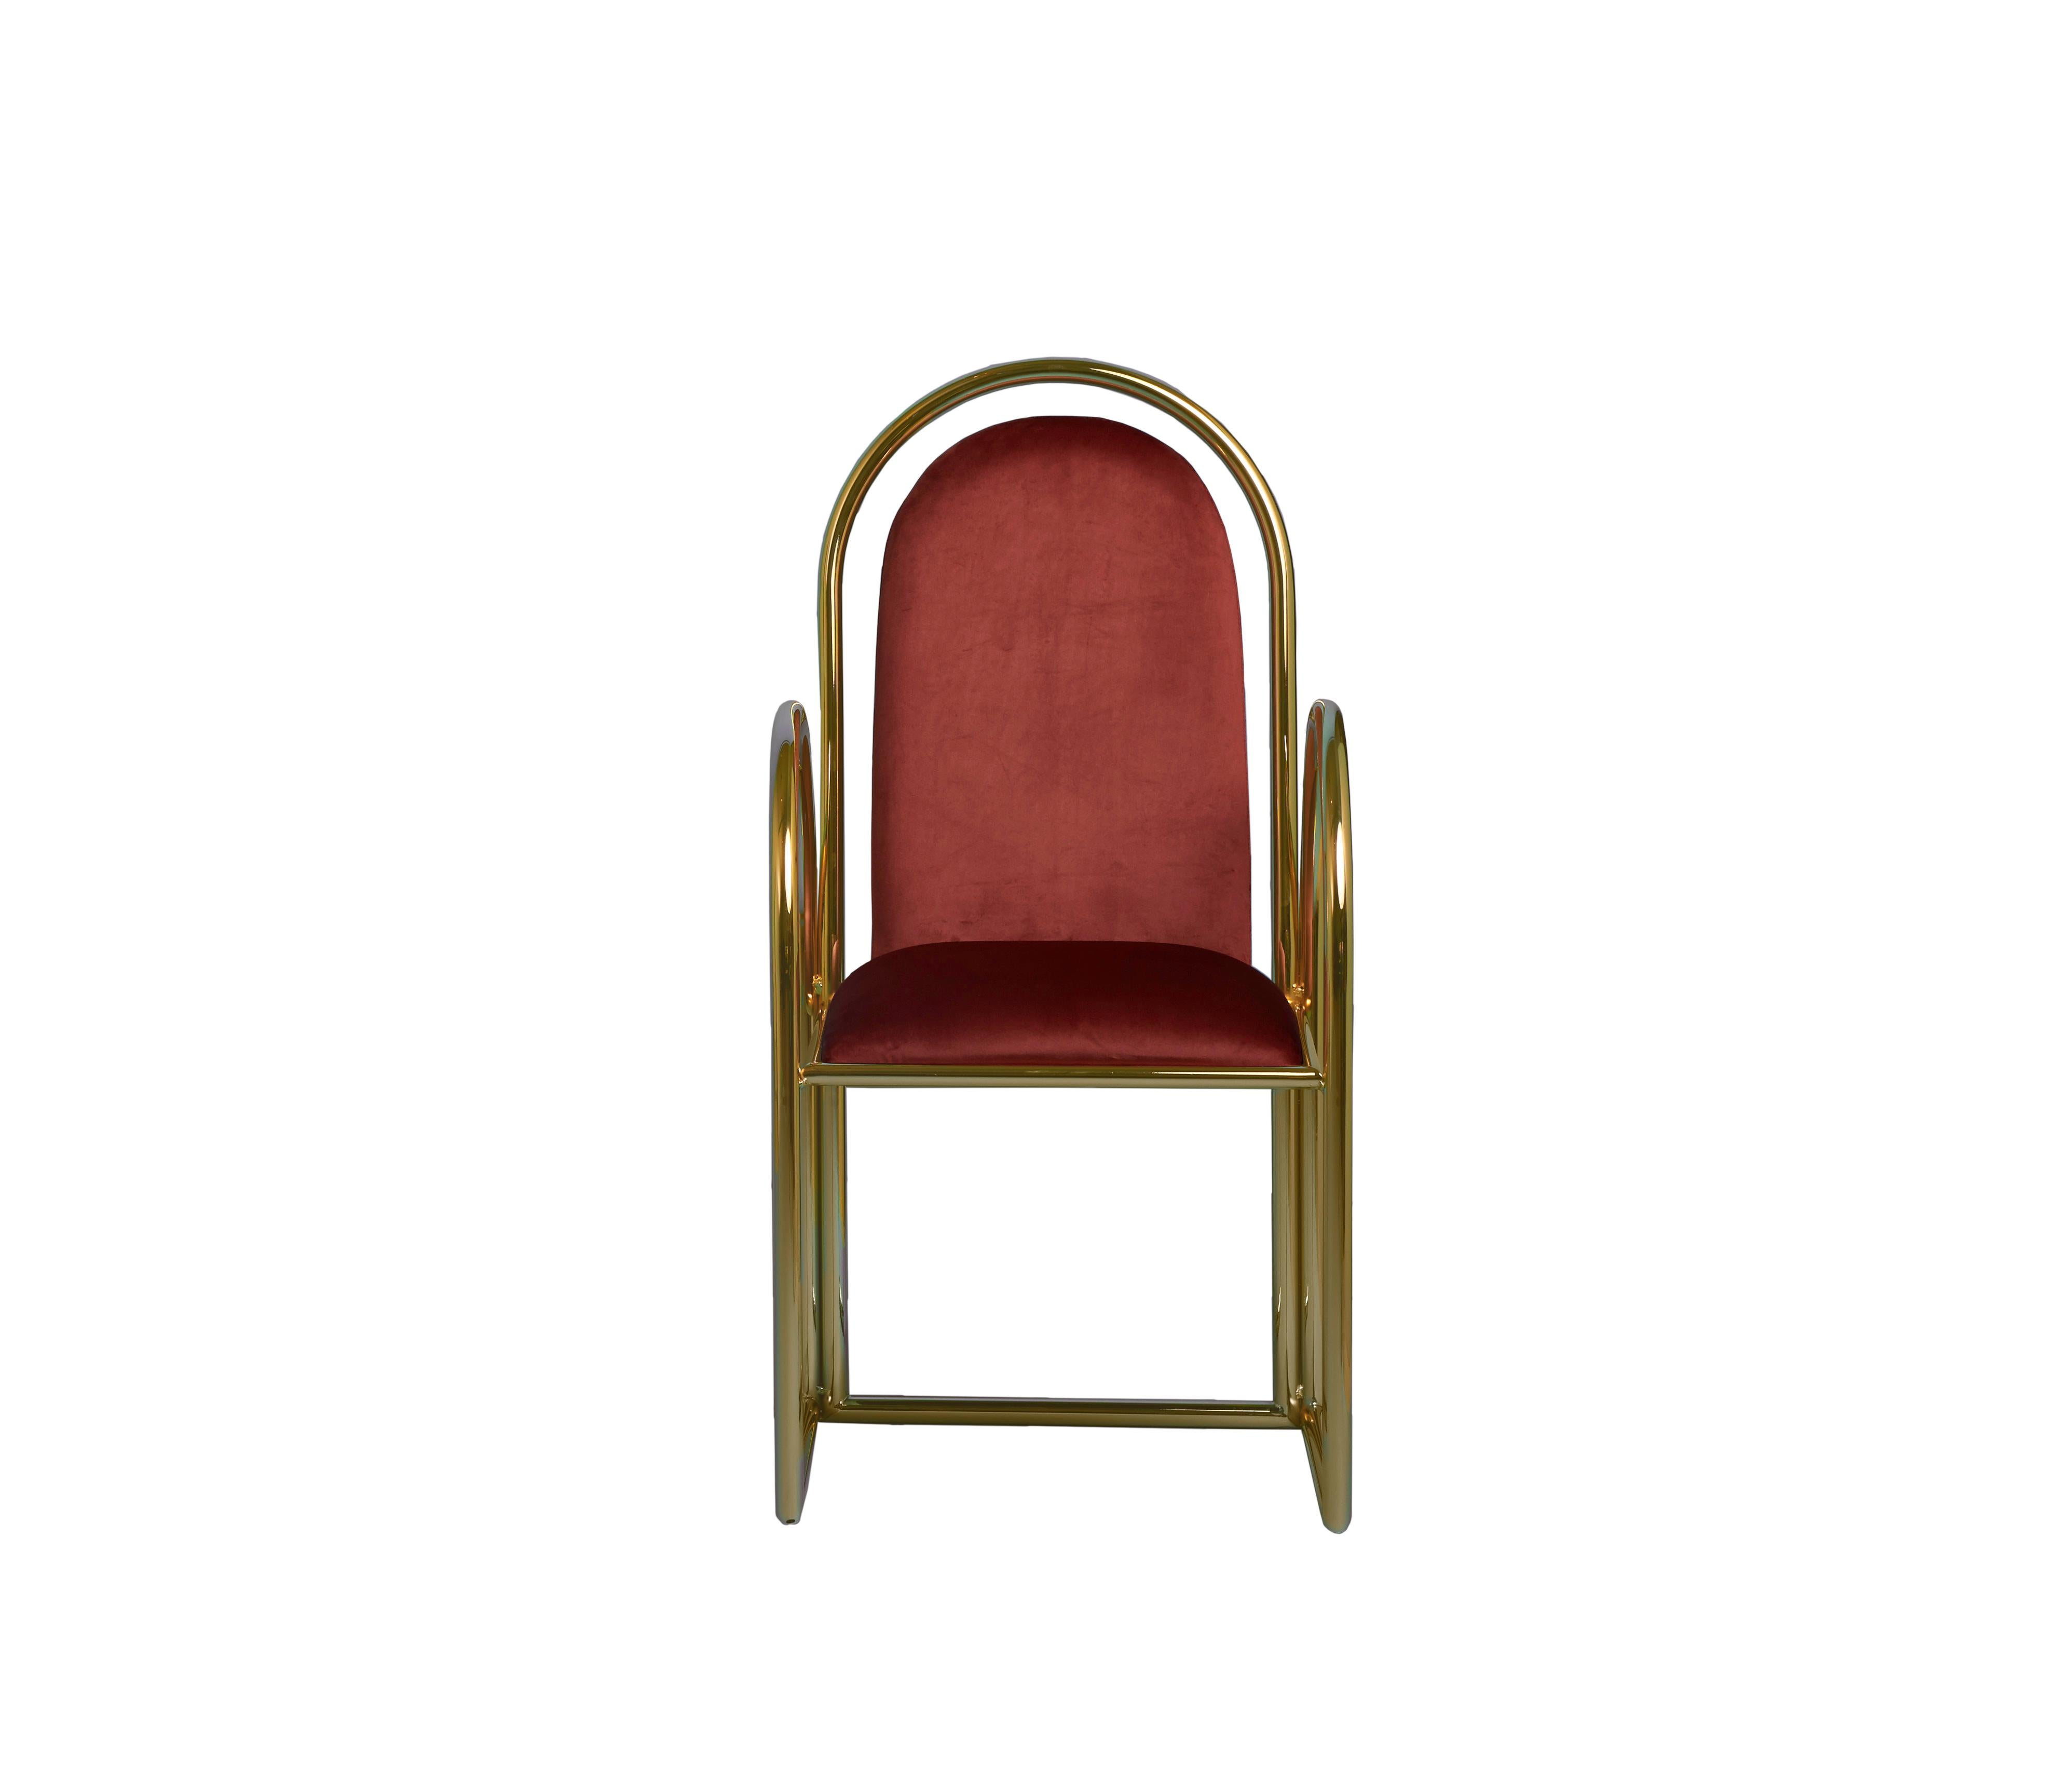 Spanish Arco Chair by Houtique